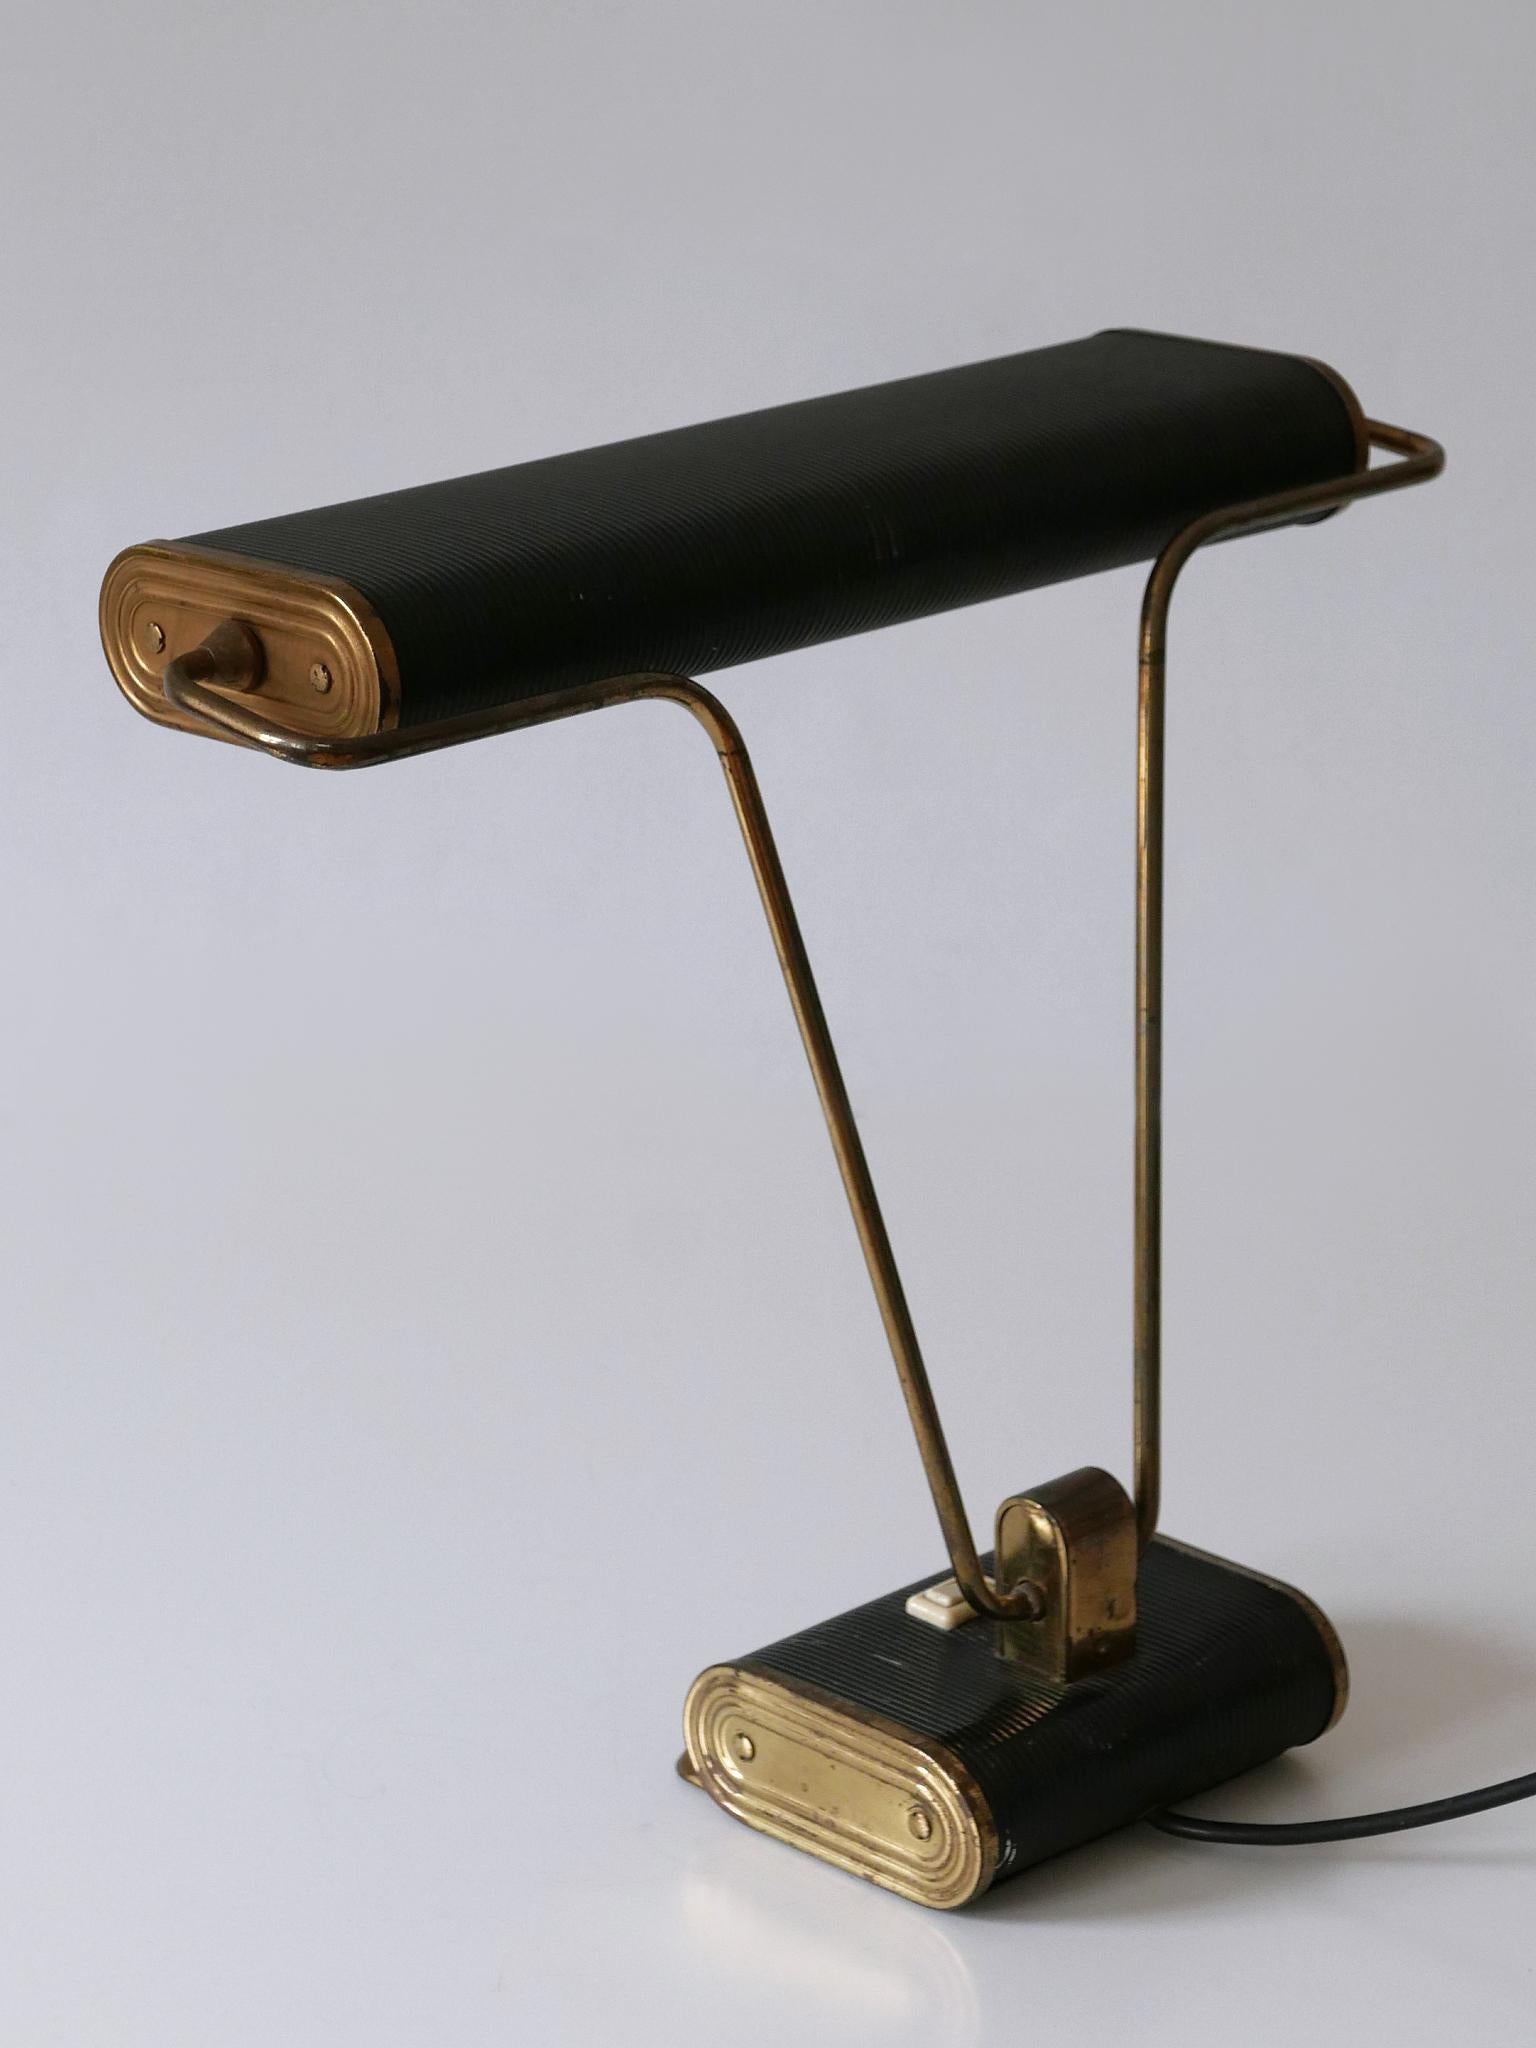 Art Deco Table Lamp or Desk Light 'No 71' by André Mounique for Jumo 1930s For Sale 6